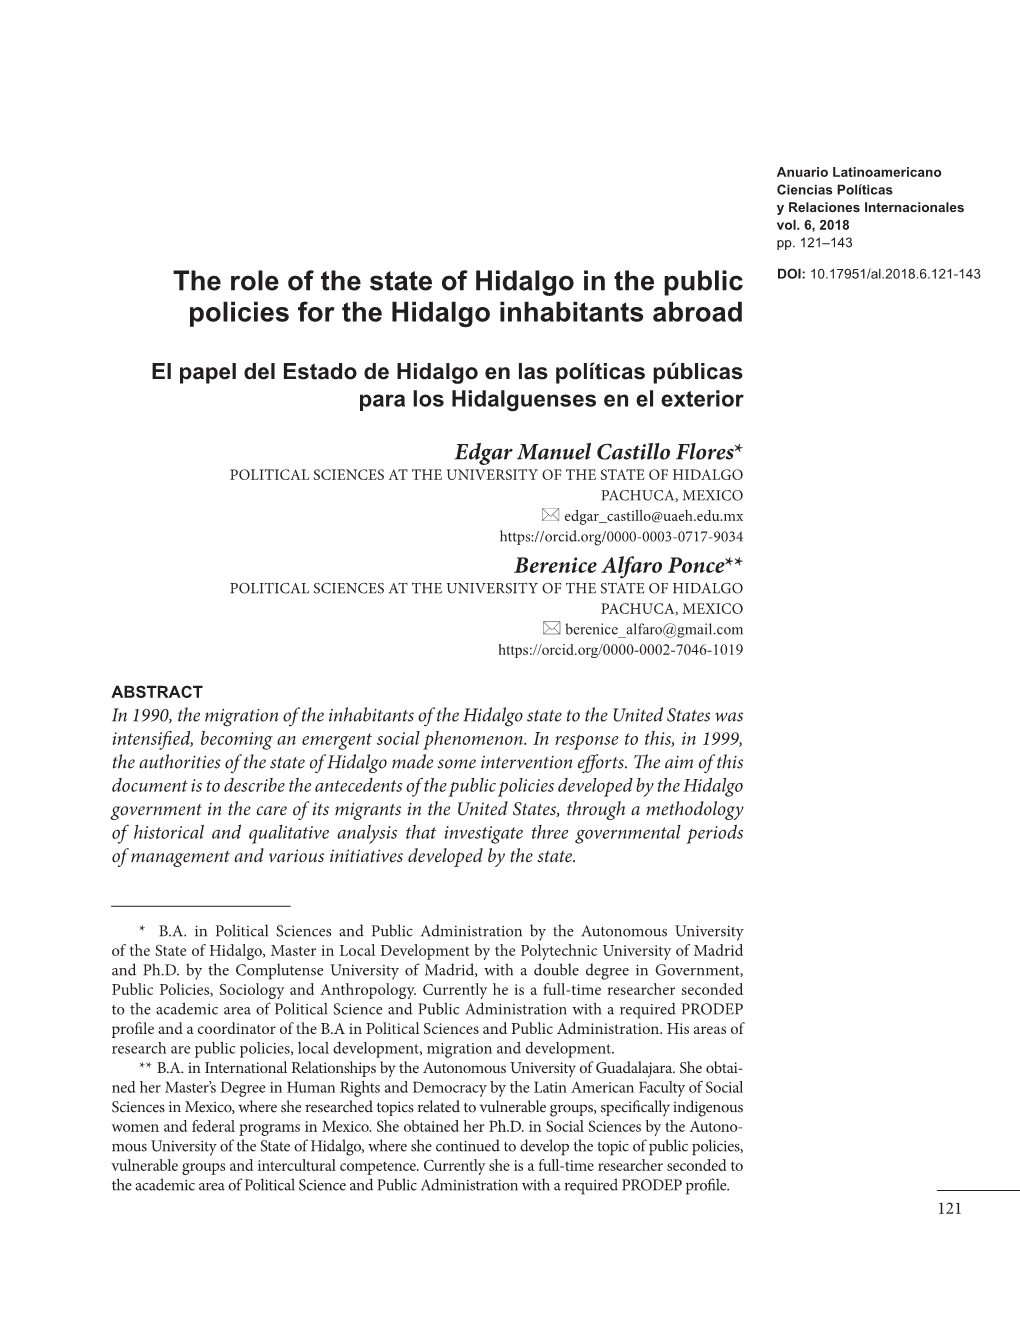 The Role of the State of Hidalgo in the Public Policies for the Hidalgo